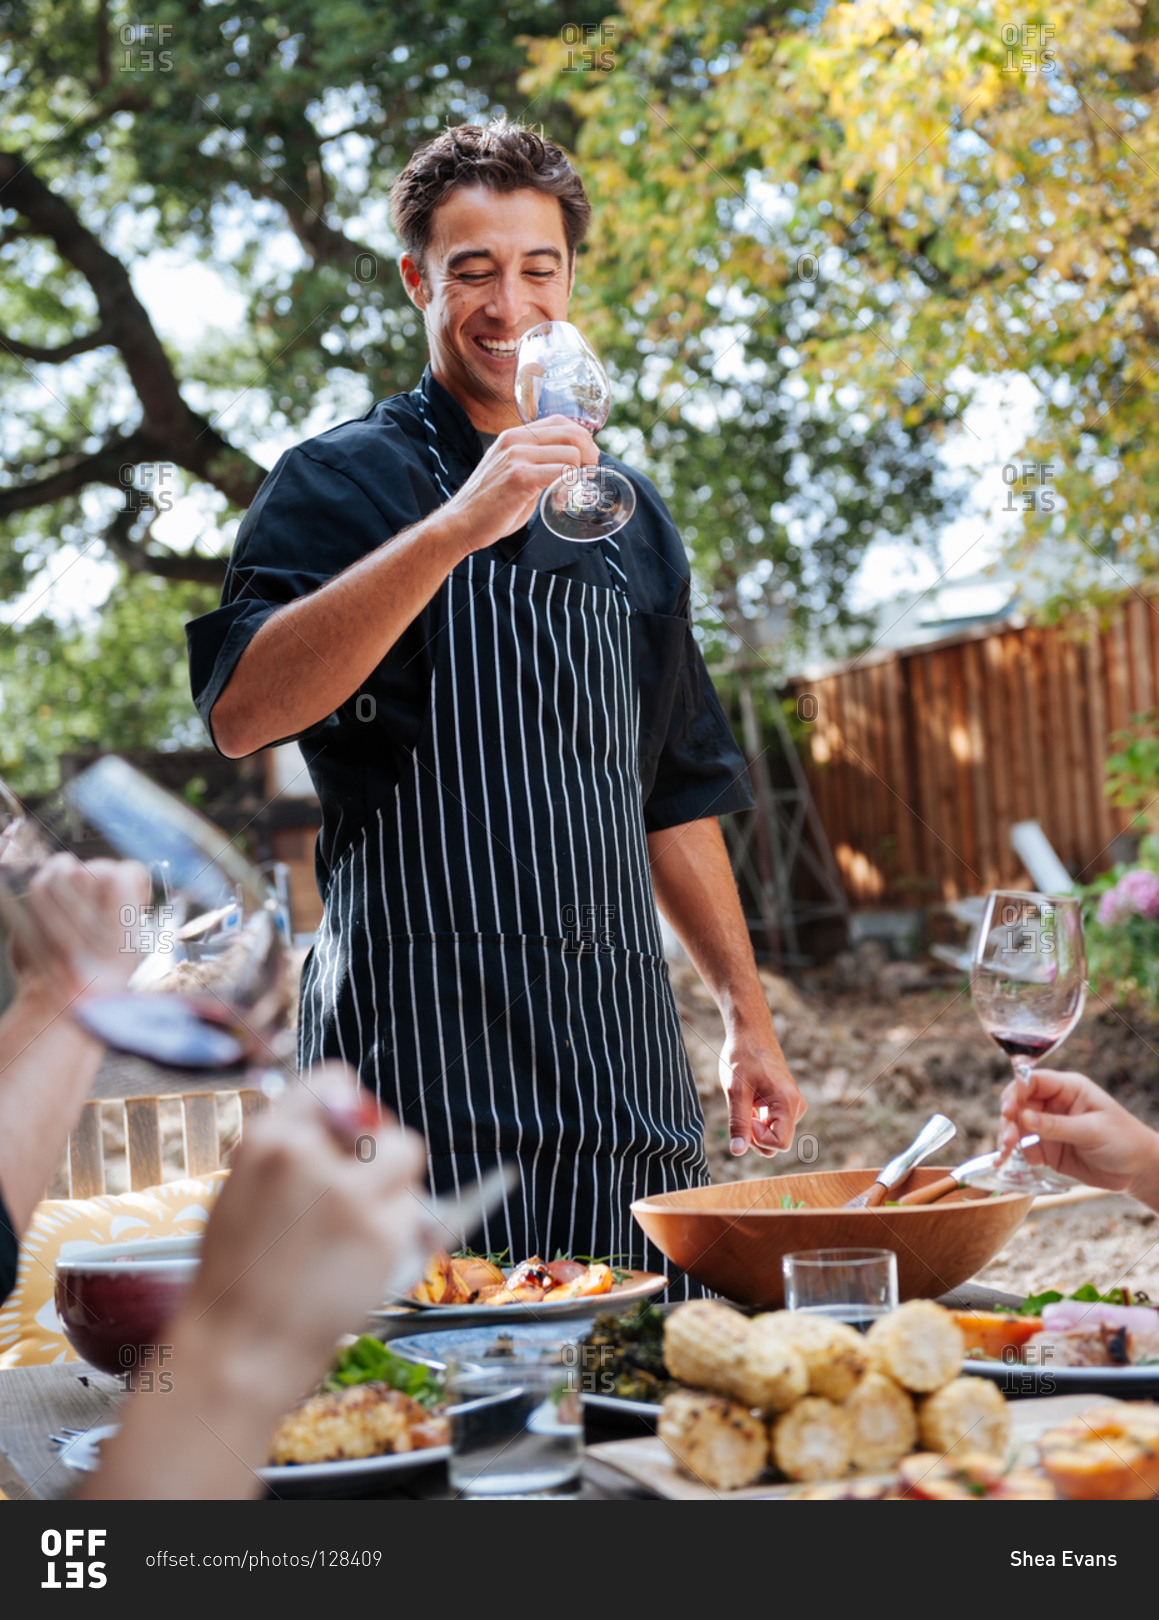 Personal chef enjoying a glass of wine with his clients at their outdoor patio with a meal